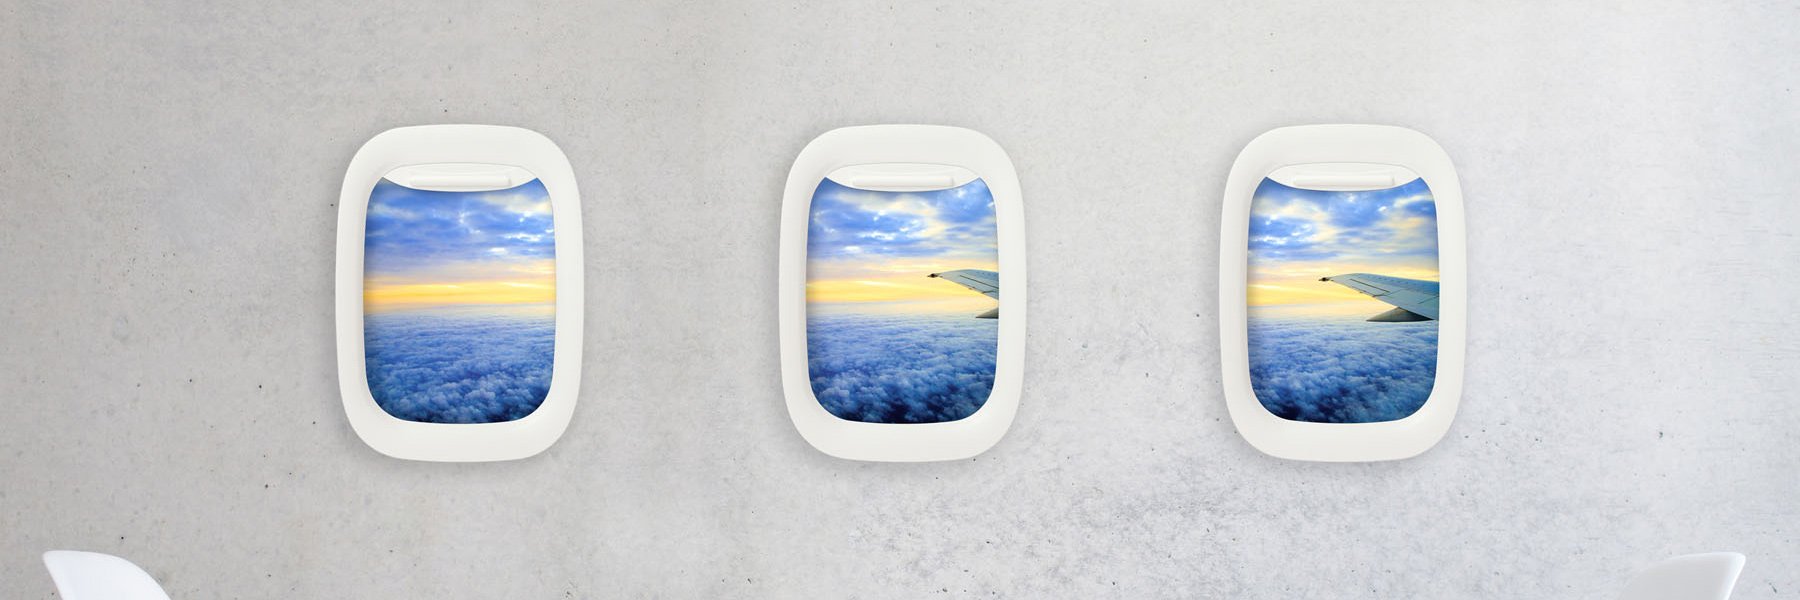 airframe – picture frame brings the window seat indoors